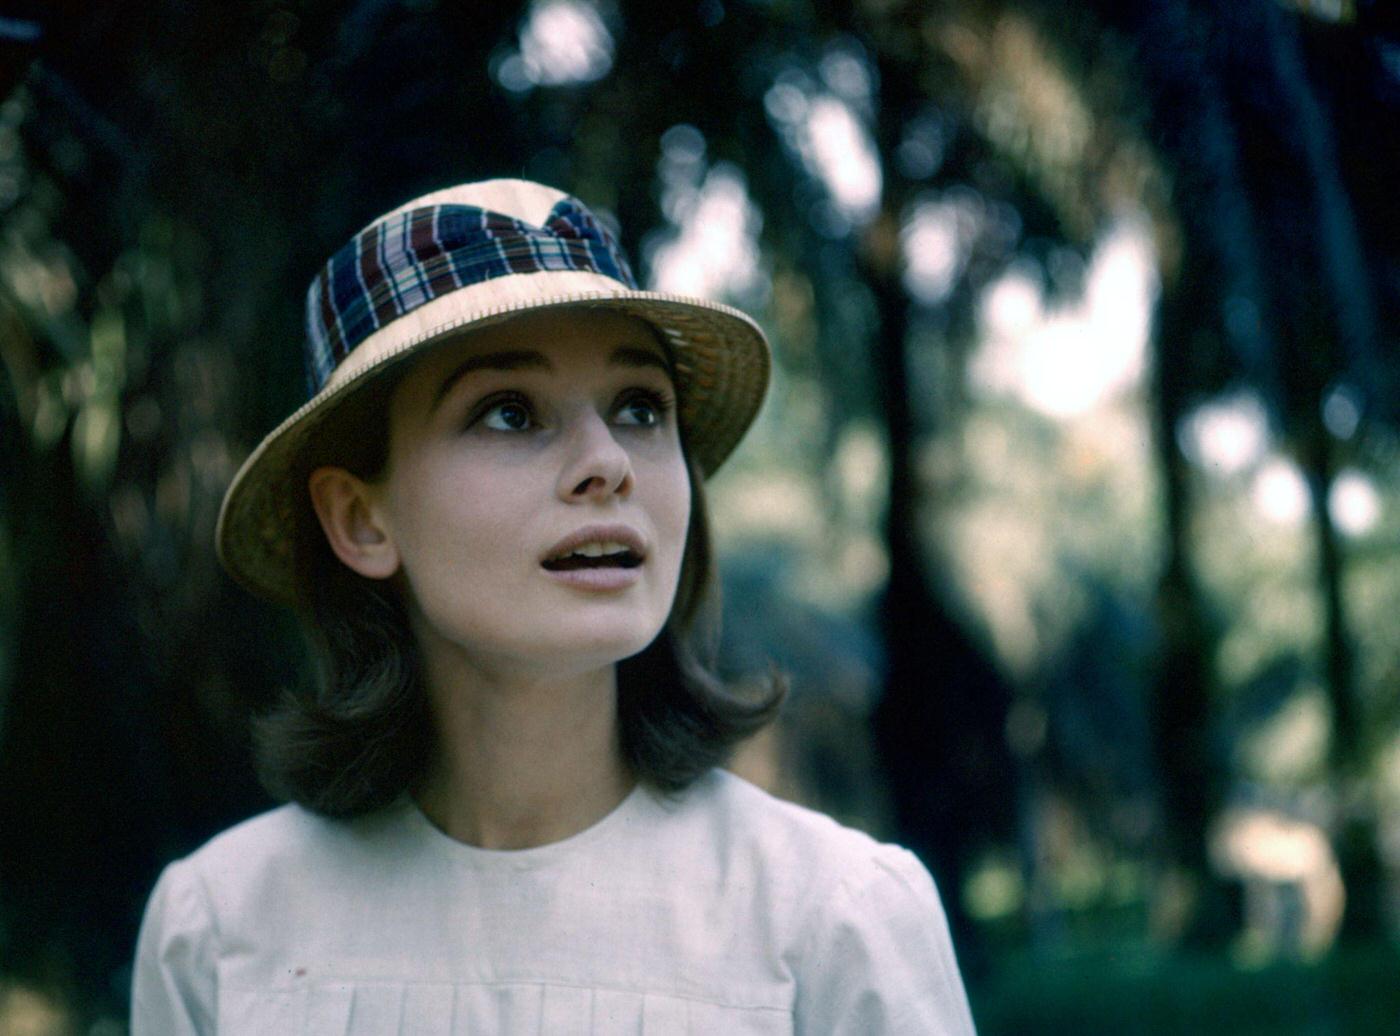 Audrey Hepburn poses with a hat near the rainforest in the Democratic Republic of Congo, 1958.